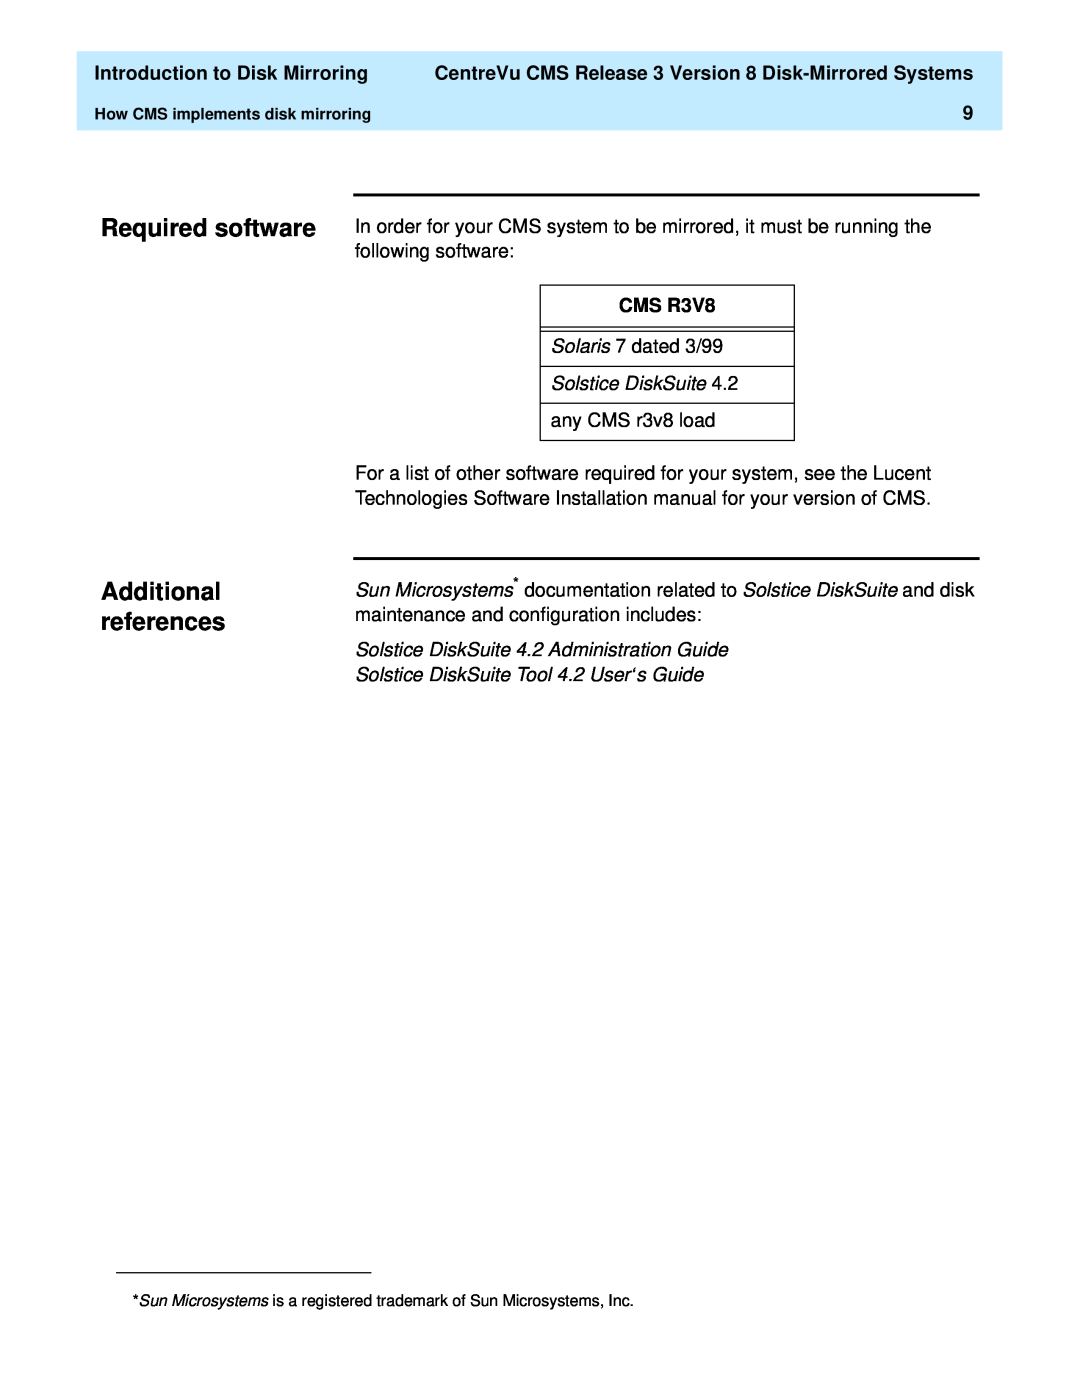 Lucent Technologies 585-210-940 manual Required software, Additional references 